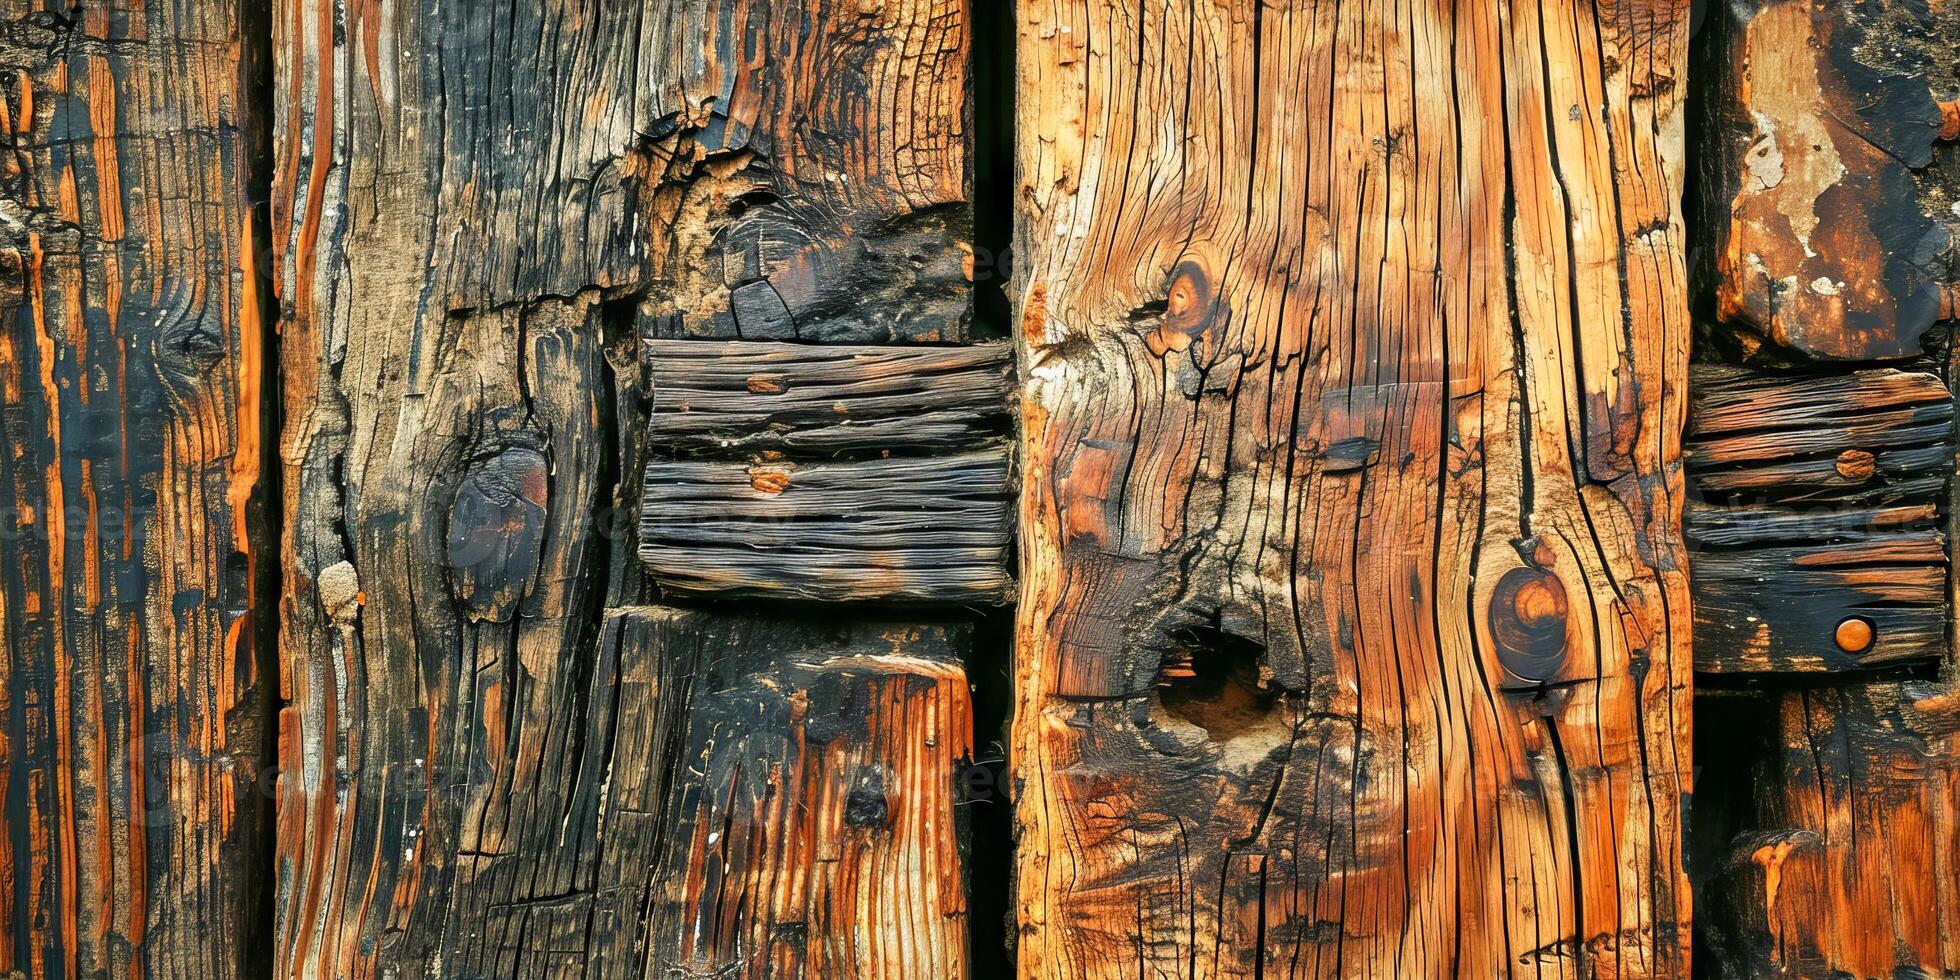 AI generated Vivid textures of worn wooden planks featuring knots, grain patterns, and rustic charm photo